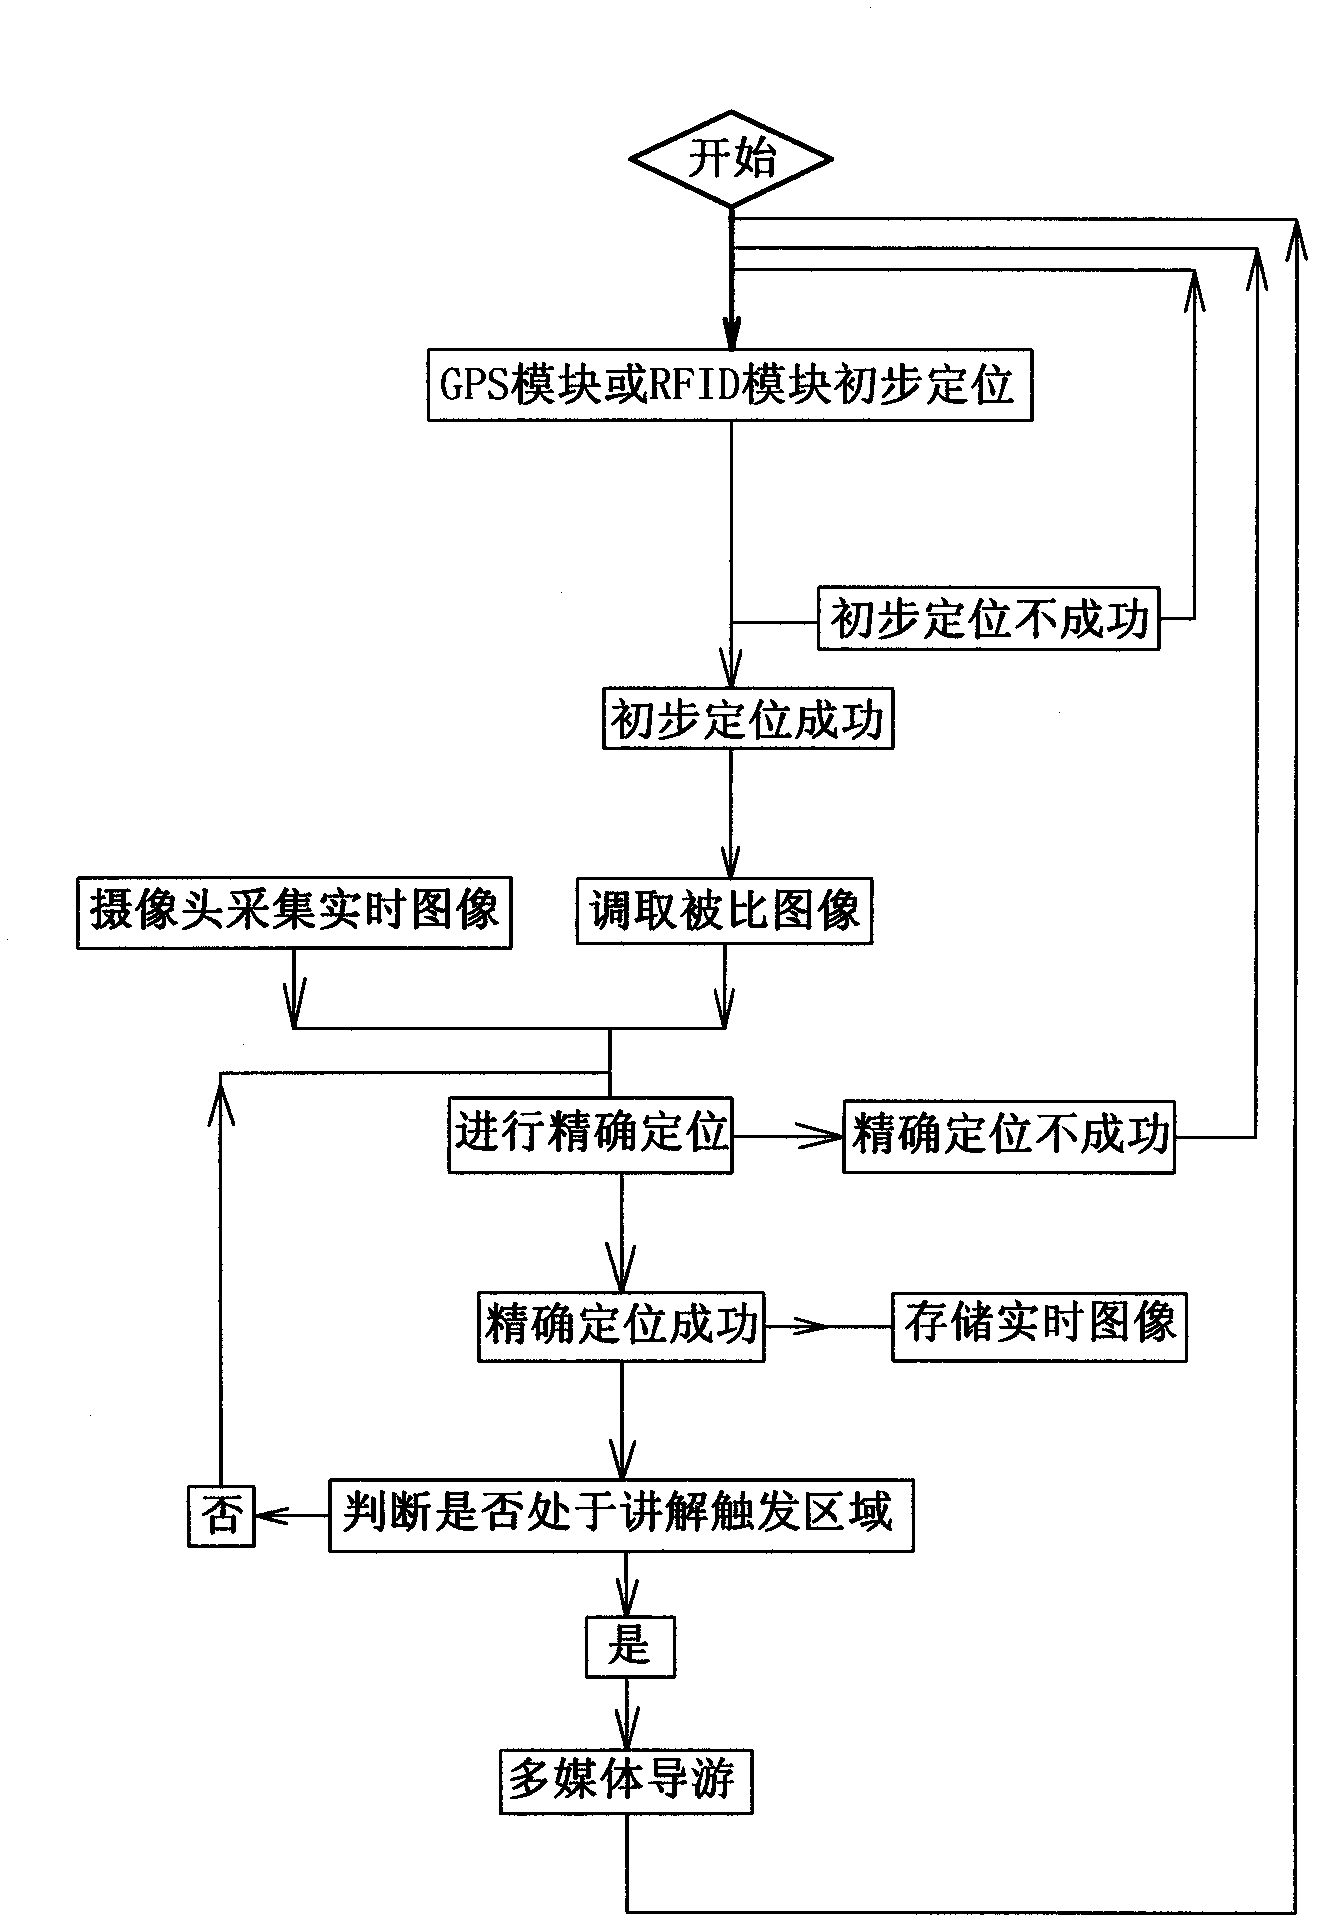 Adaptive localization self-help tour guide method and system